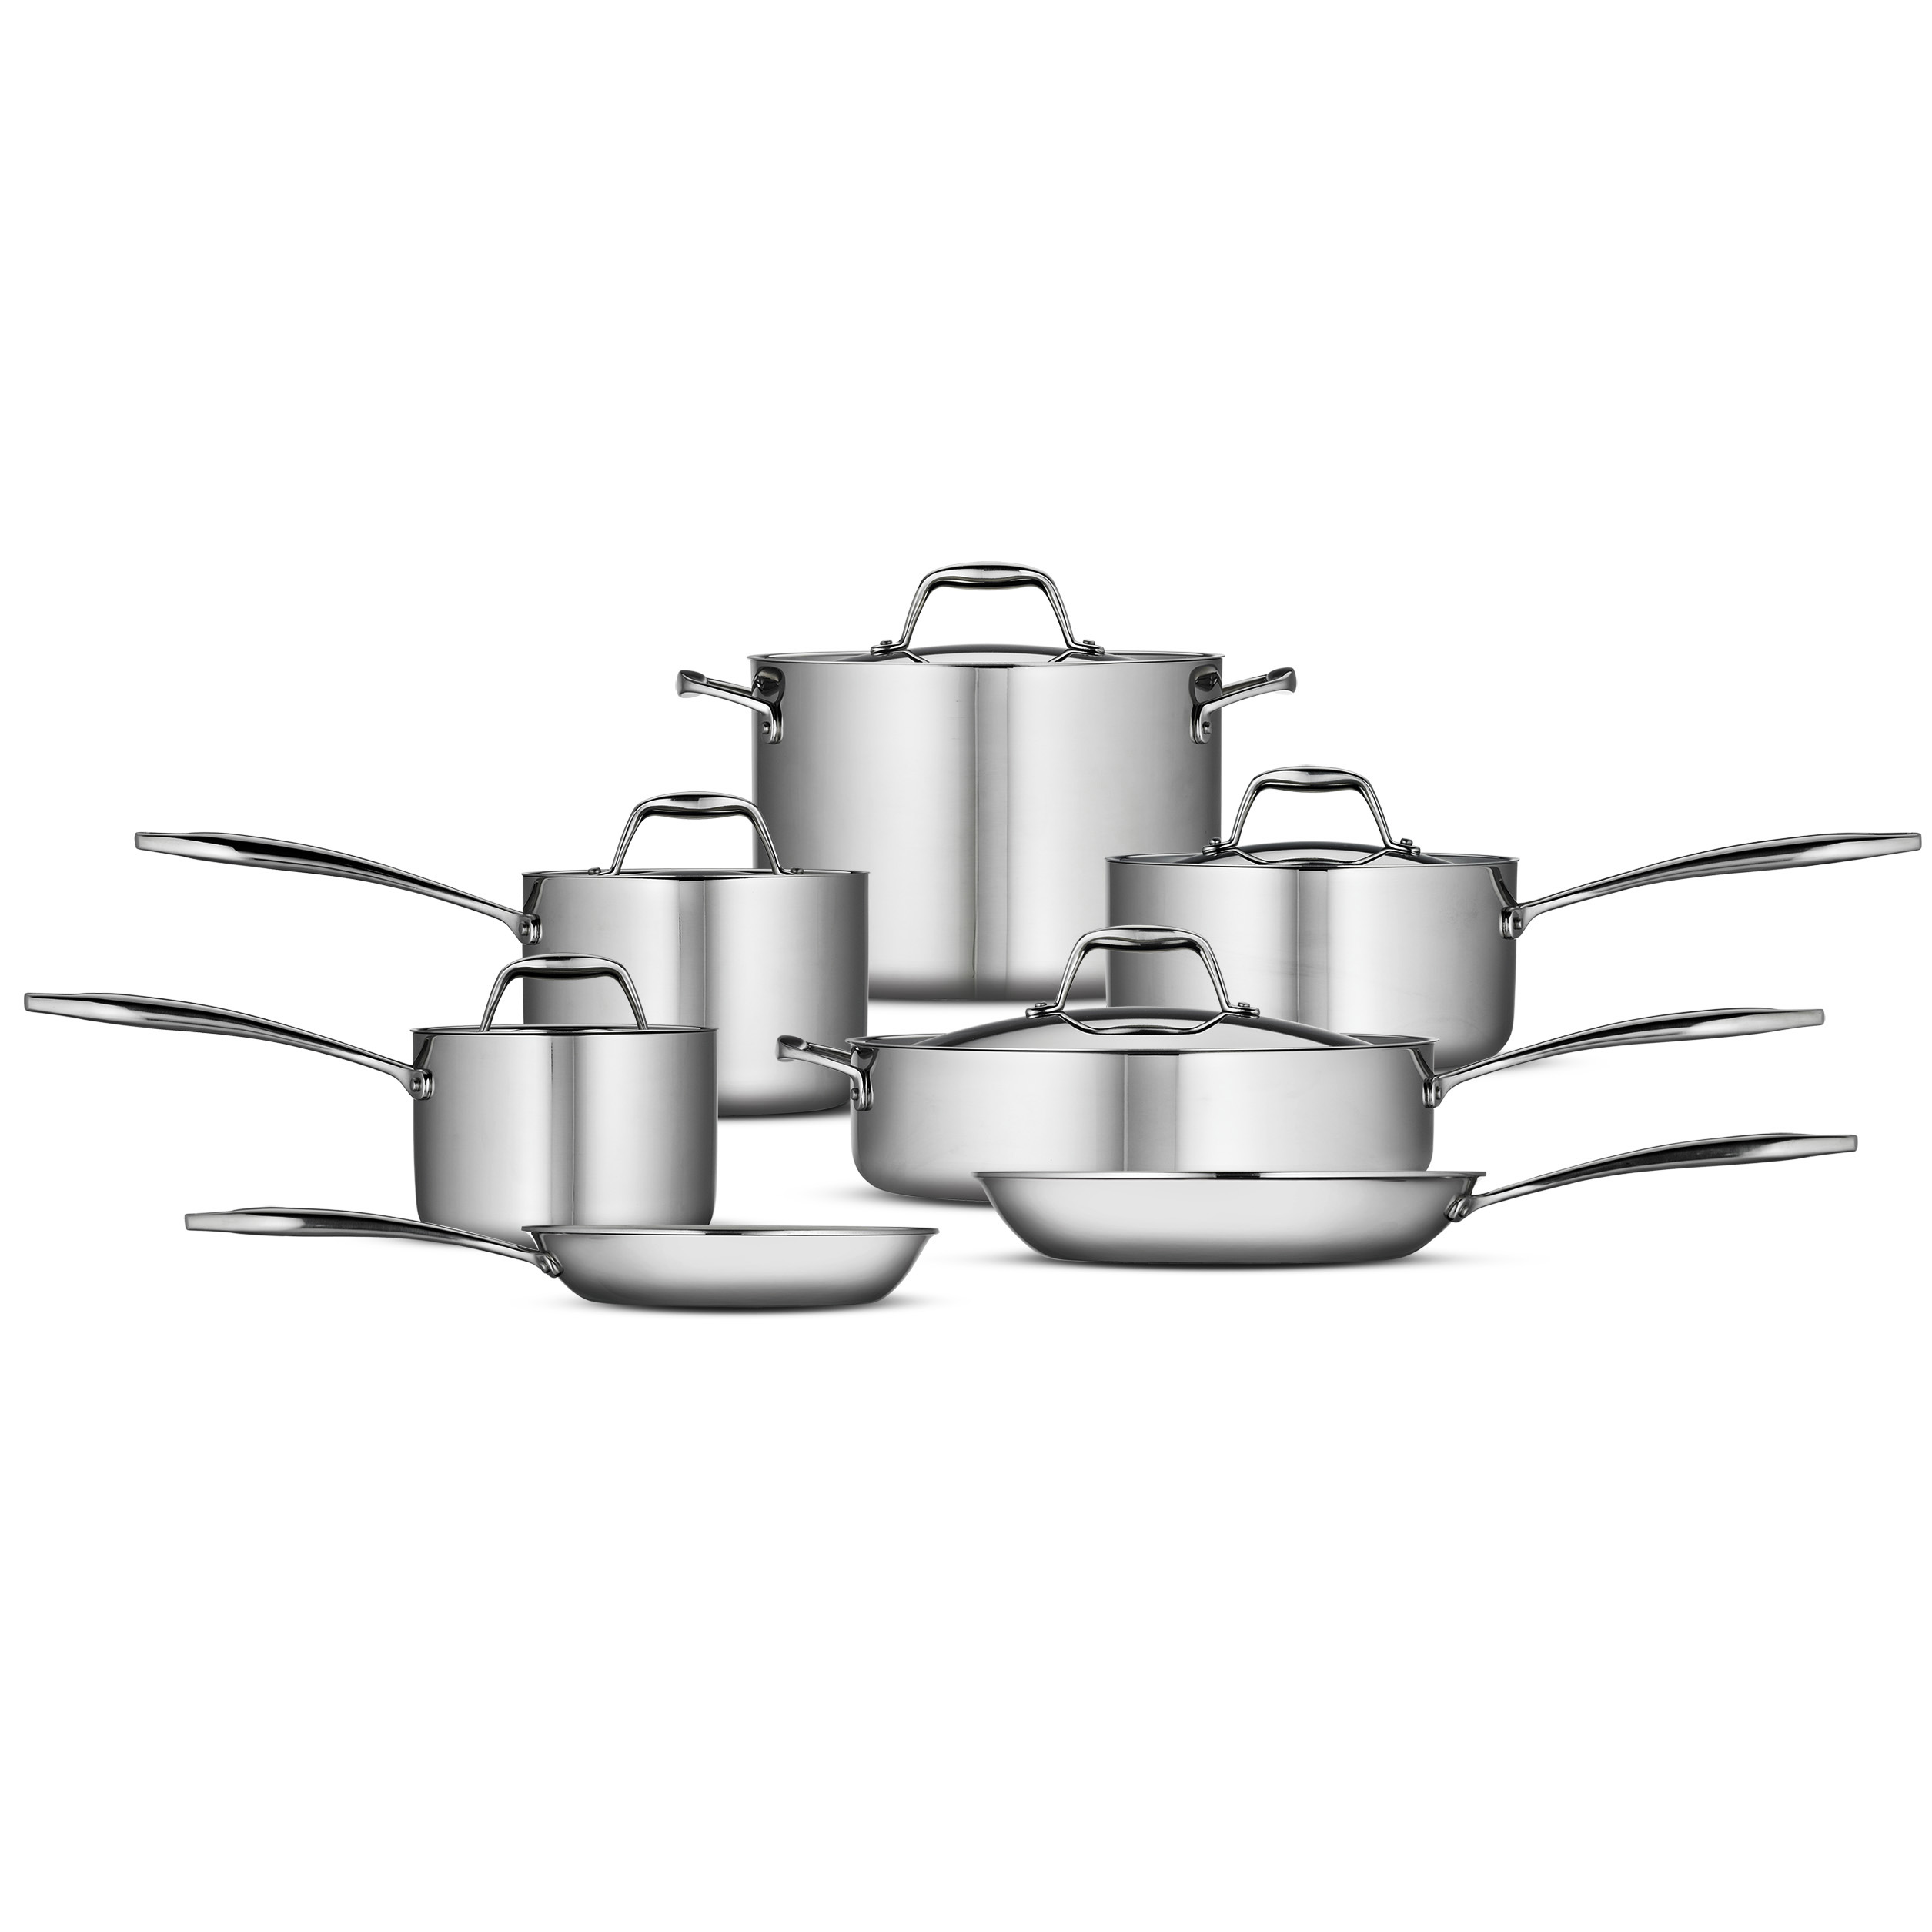 0016017101210 - GOURMET -TRI-PLY CLAD 18/10 STAINLESS STEEL, INDUCTION-READY 12 PC COOKWARE SET